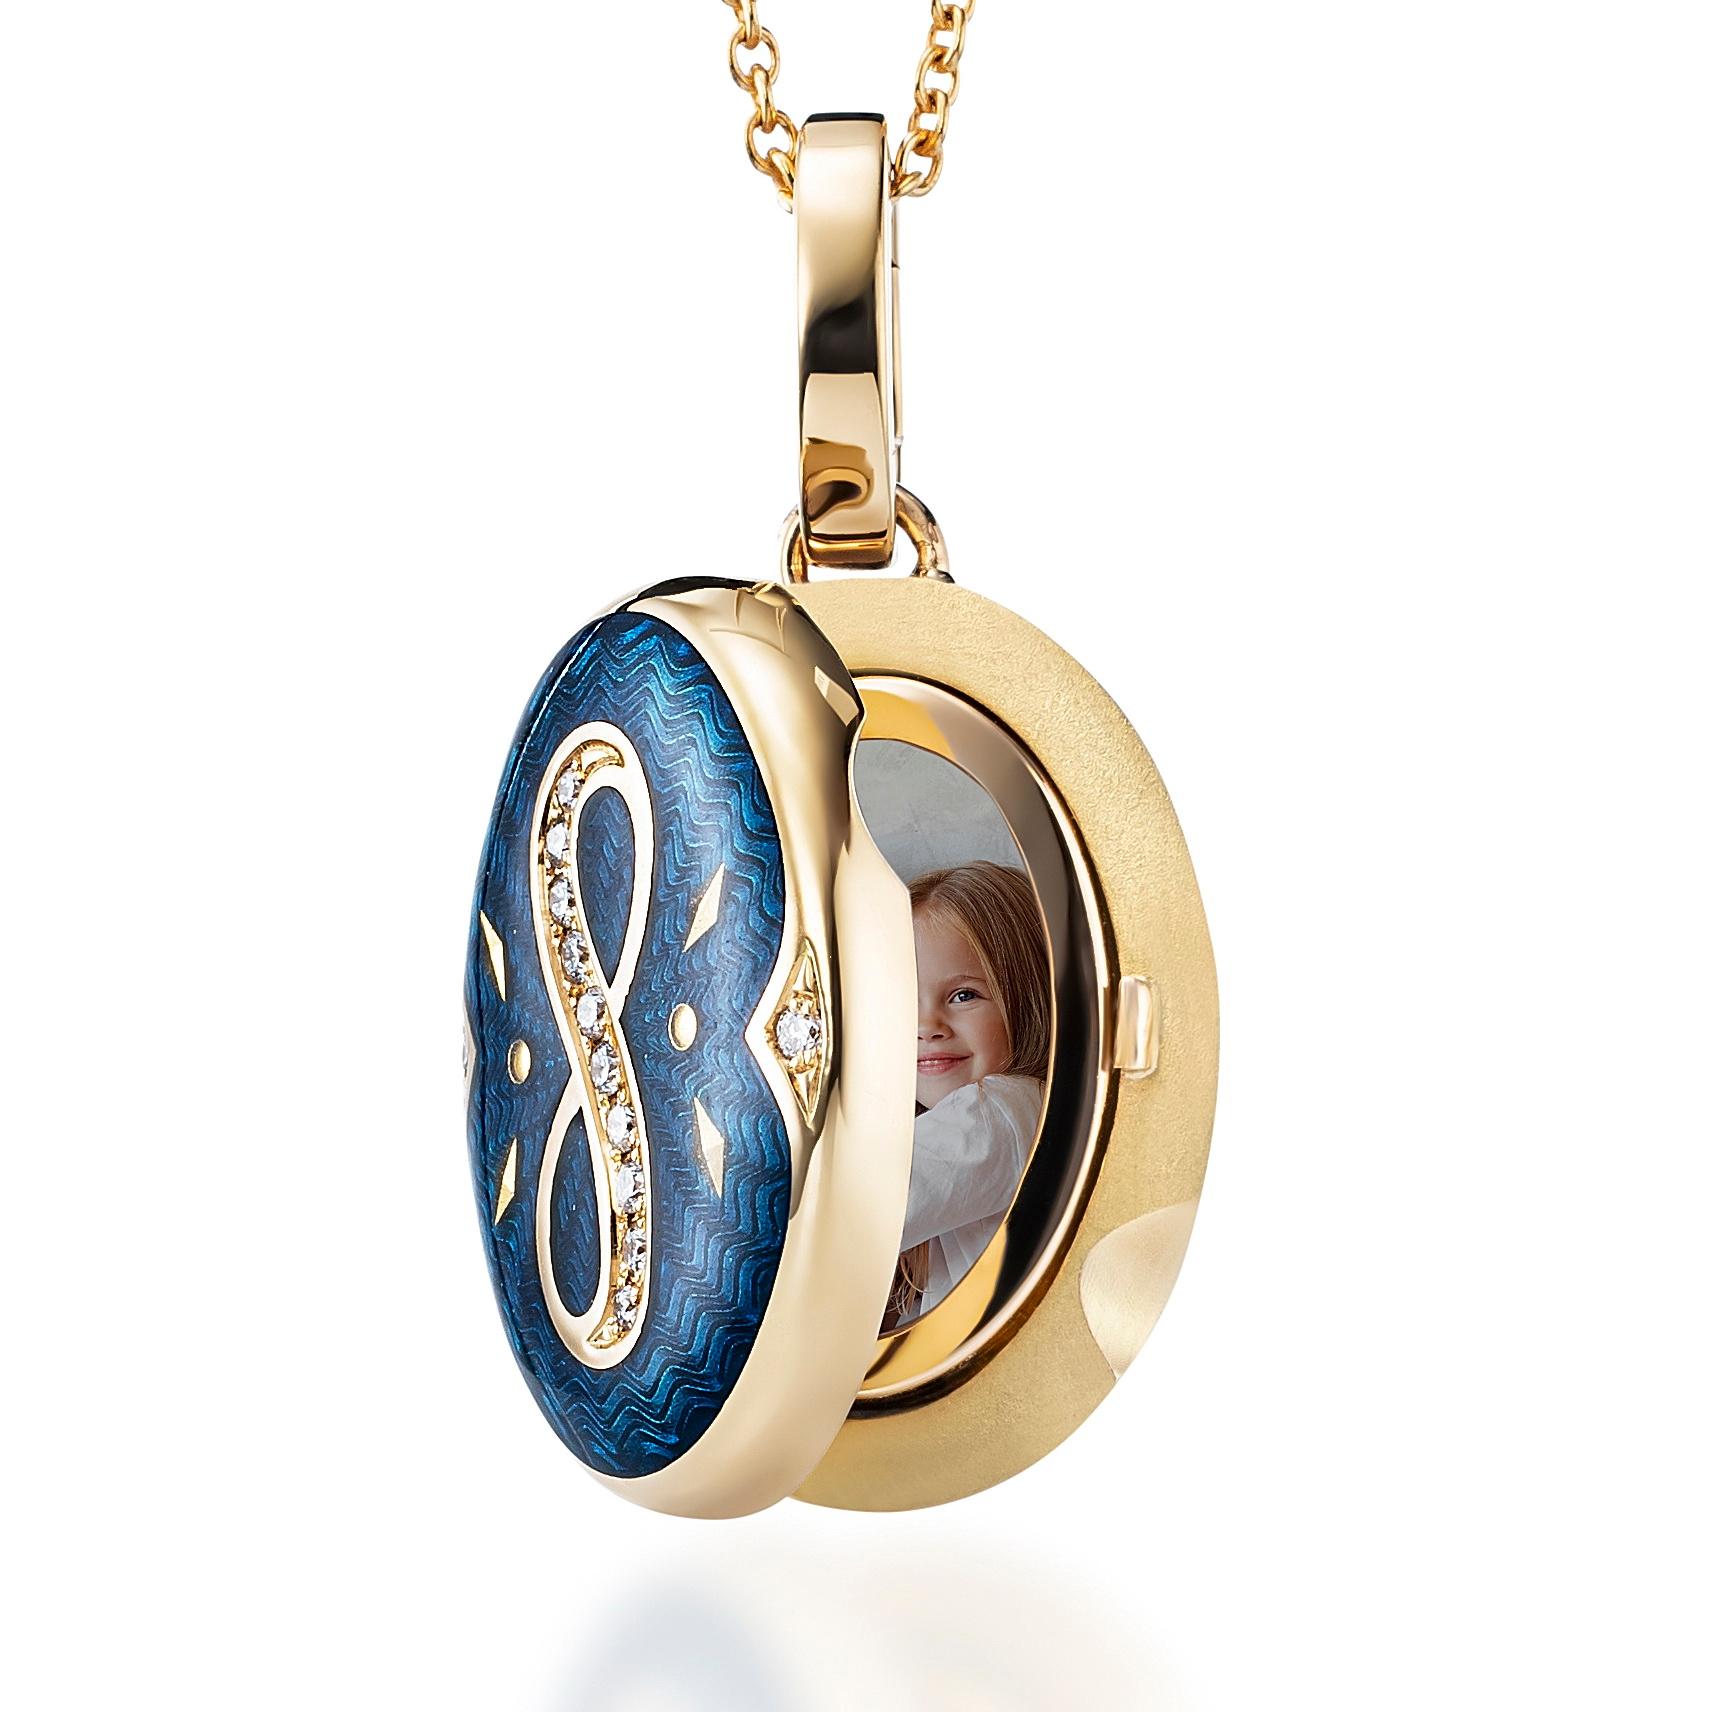 Victor Mayer oval locket pendant necklace with infinity symbol 18k yellow gold, Victoria Collection, translucent peacock blue vitreous enamel, gold paillons, 12 diamonds, total 0.08 ct, G VS, brilliant cut, measurements app. 15.0 mm x 20.0 mm

About